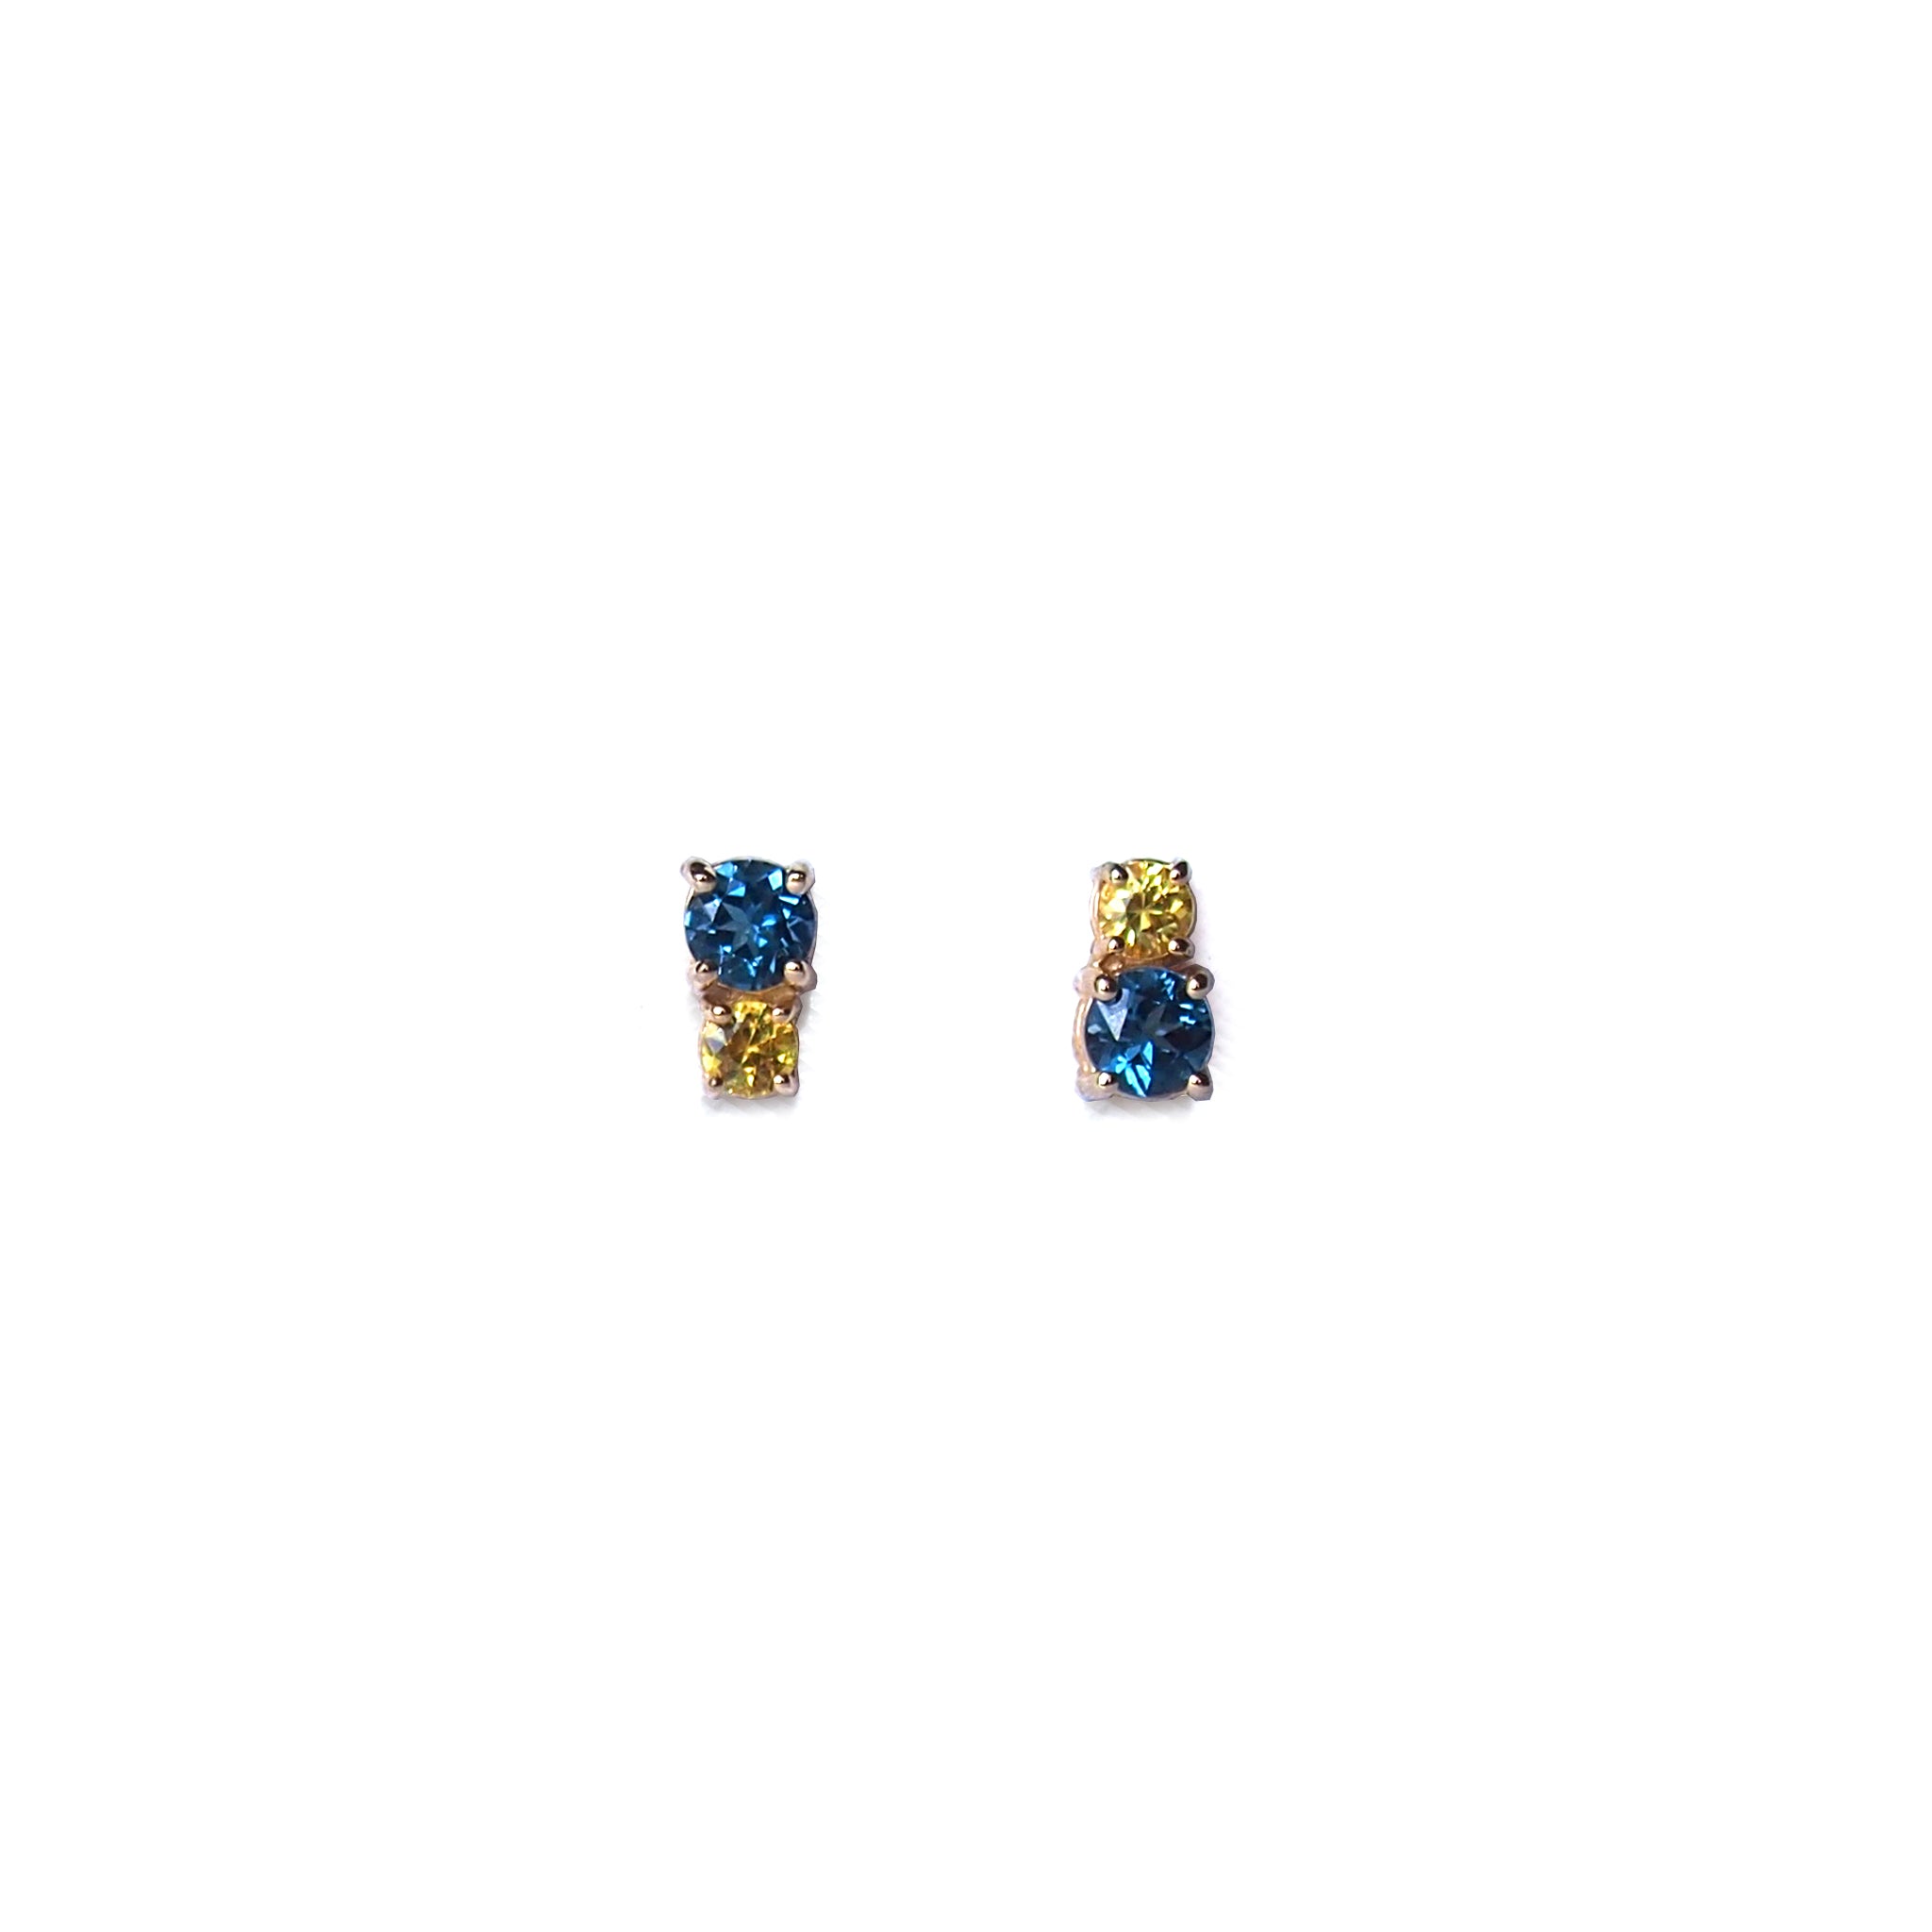 Lico Jewelry Mariner Earrings in 14k Yellow Gold with Swiss Blue Topaz and Yellow Sapphire